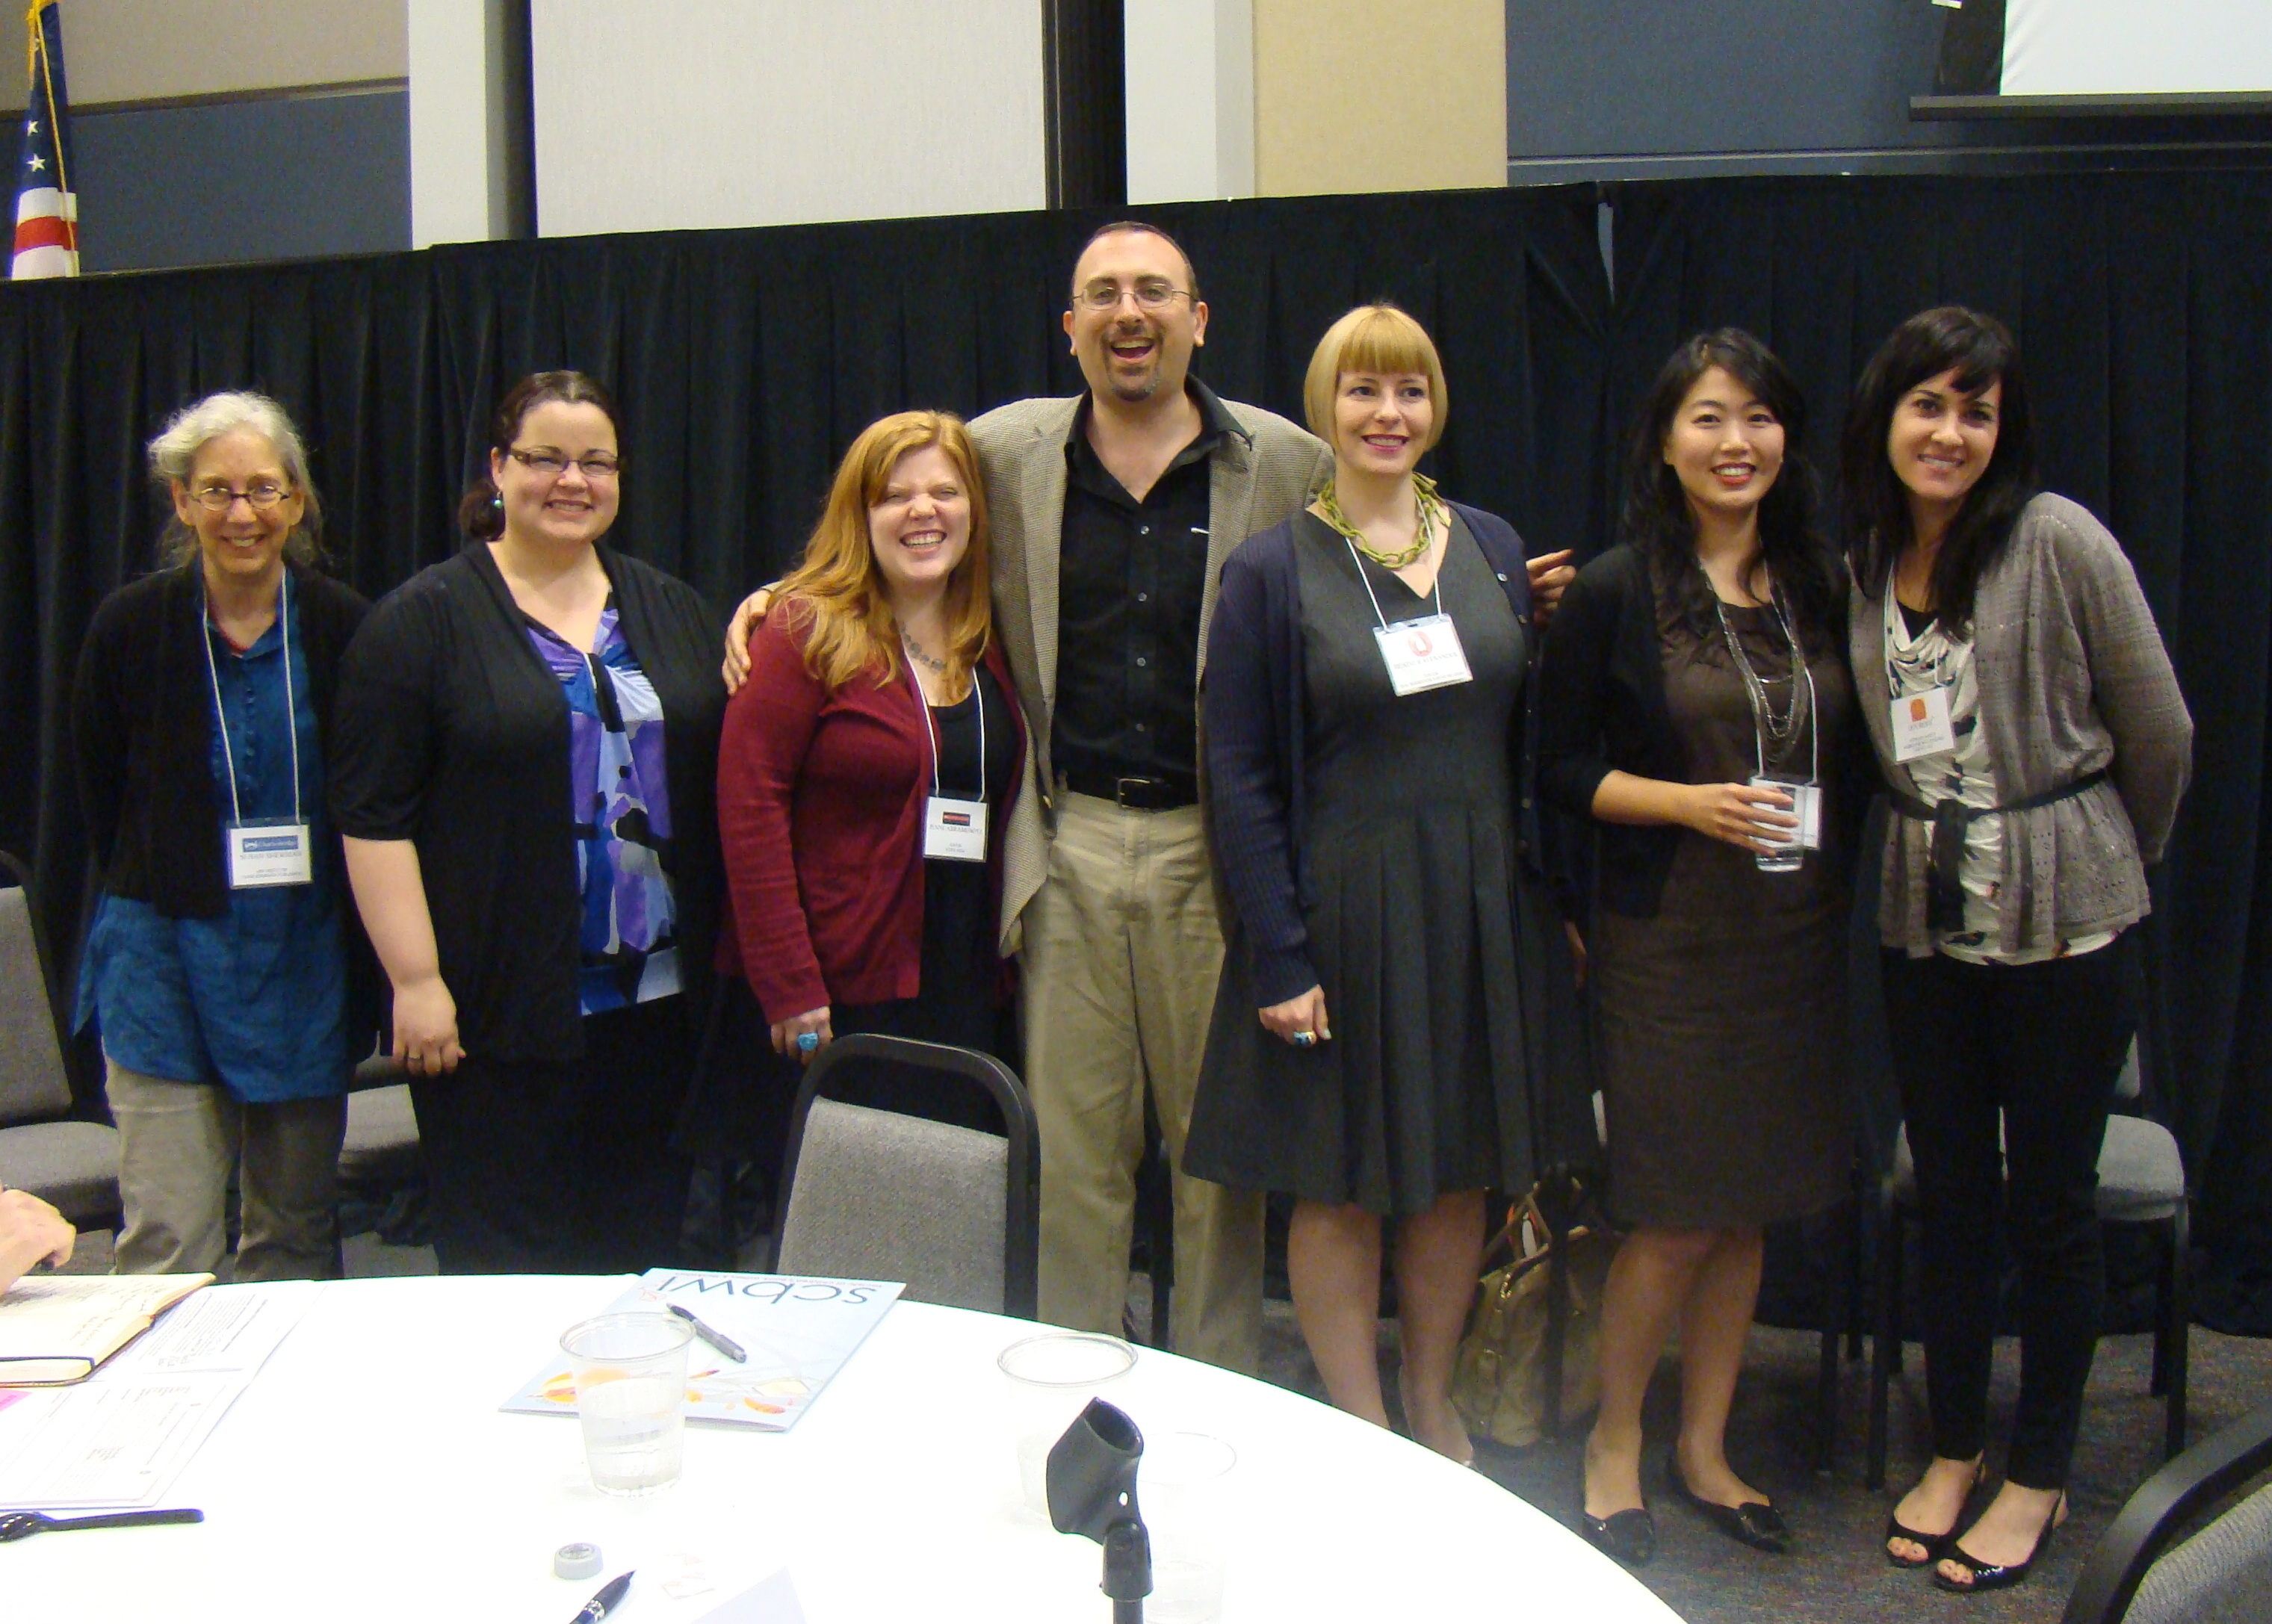 Faculty for the Houston SCBWI regional conference 2012 art director Susan Sherman, agent, Kathleen Ortiz, editor Jenne Abramowitz, author-illustrator Dan Yaccarino, editors Heather Alexander and Connie Hsu, and agent Jennifer Rofé. Photo by Marianne Dyson, Houston SCBWI